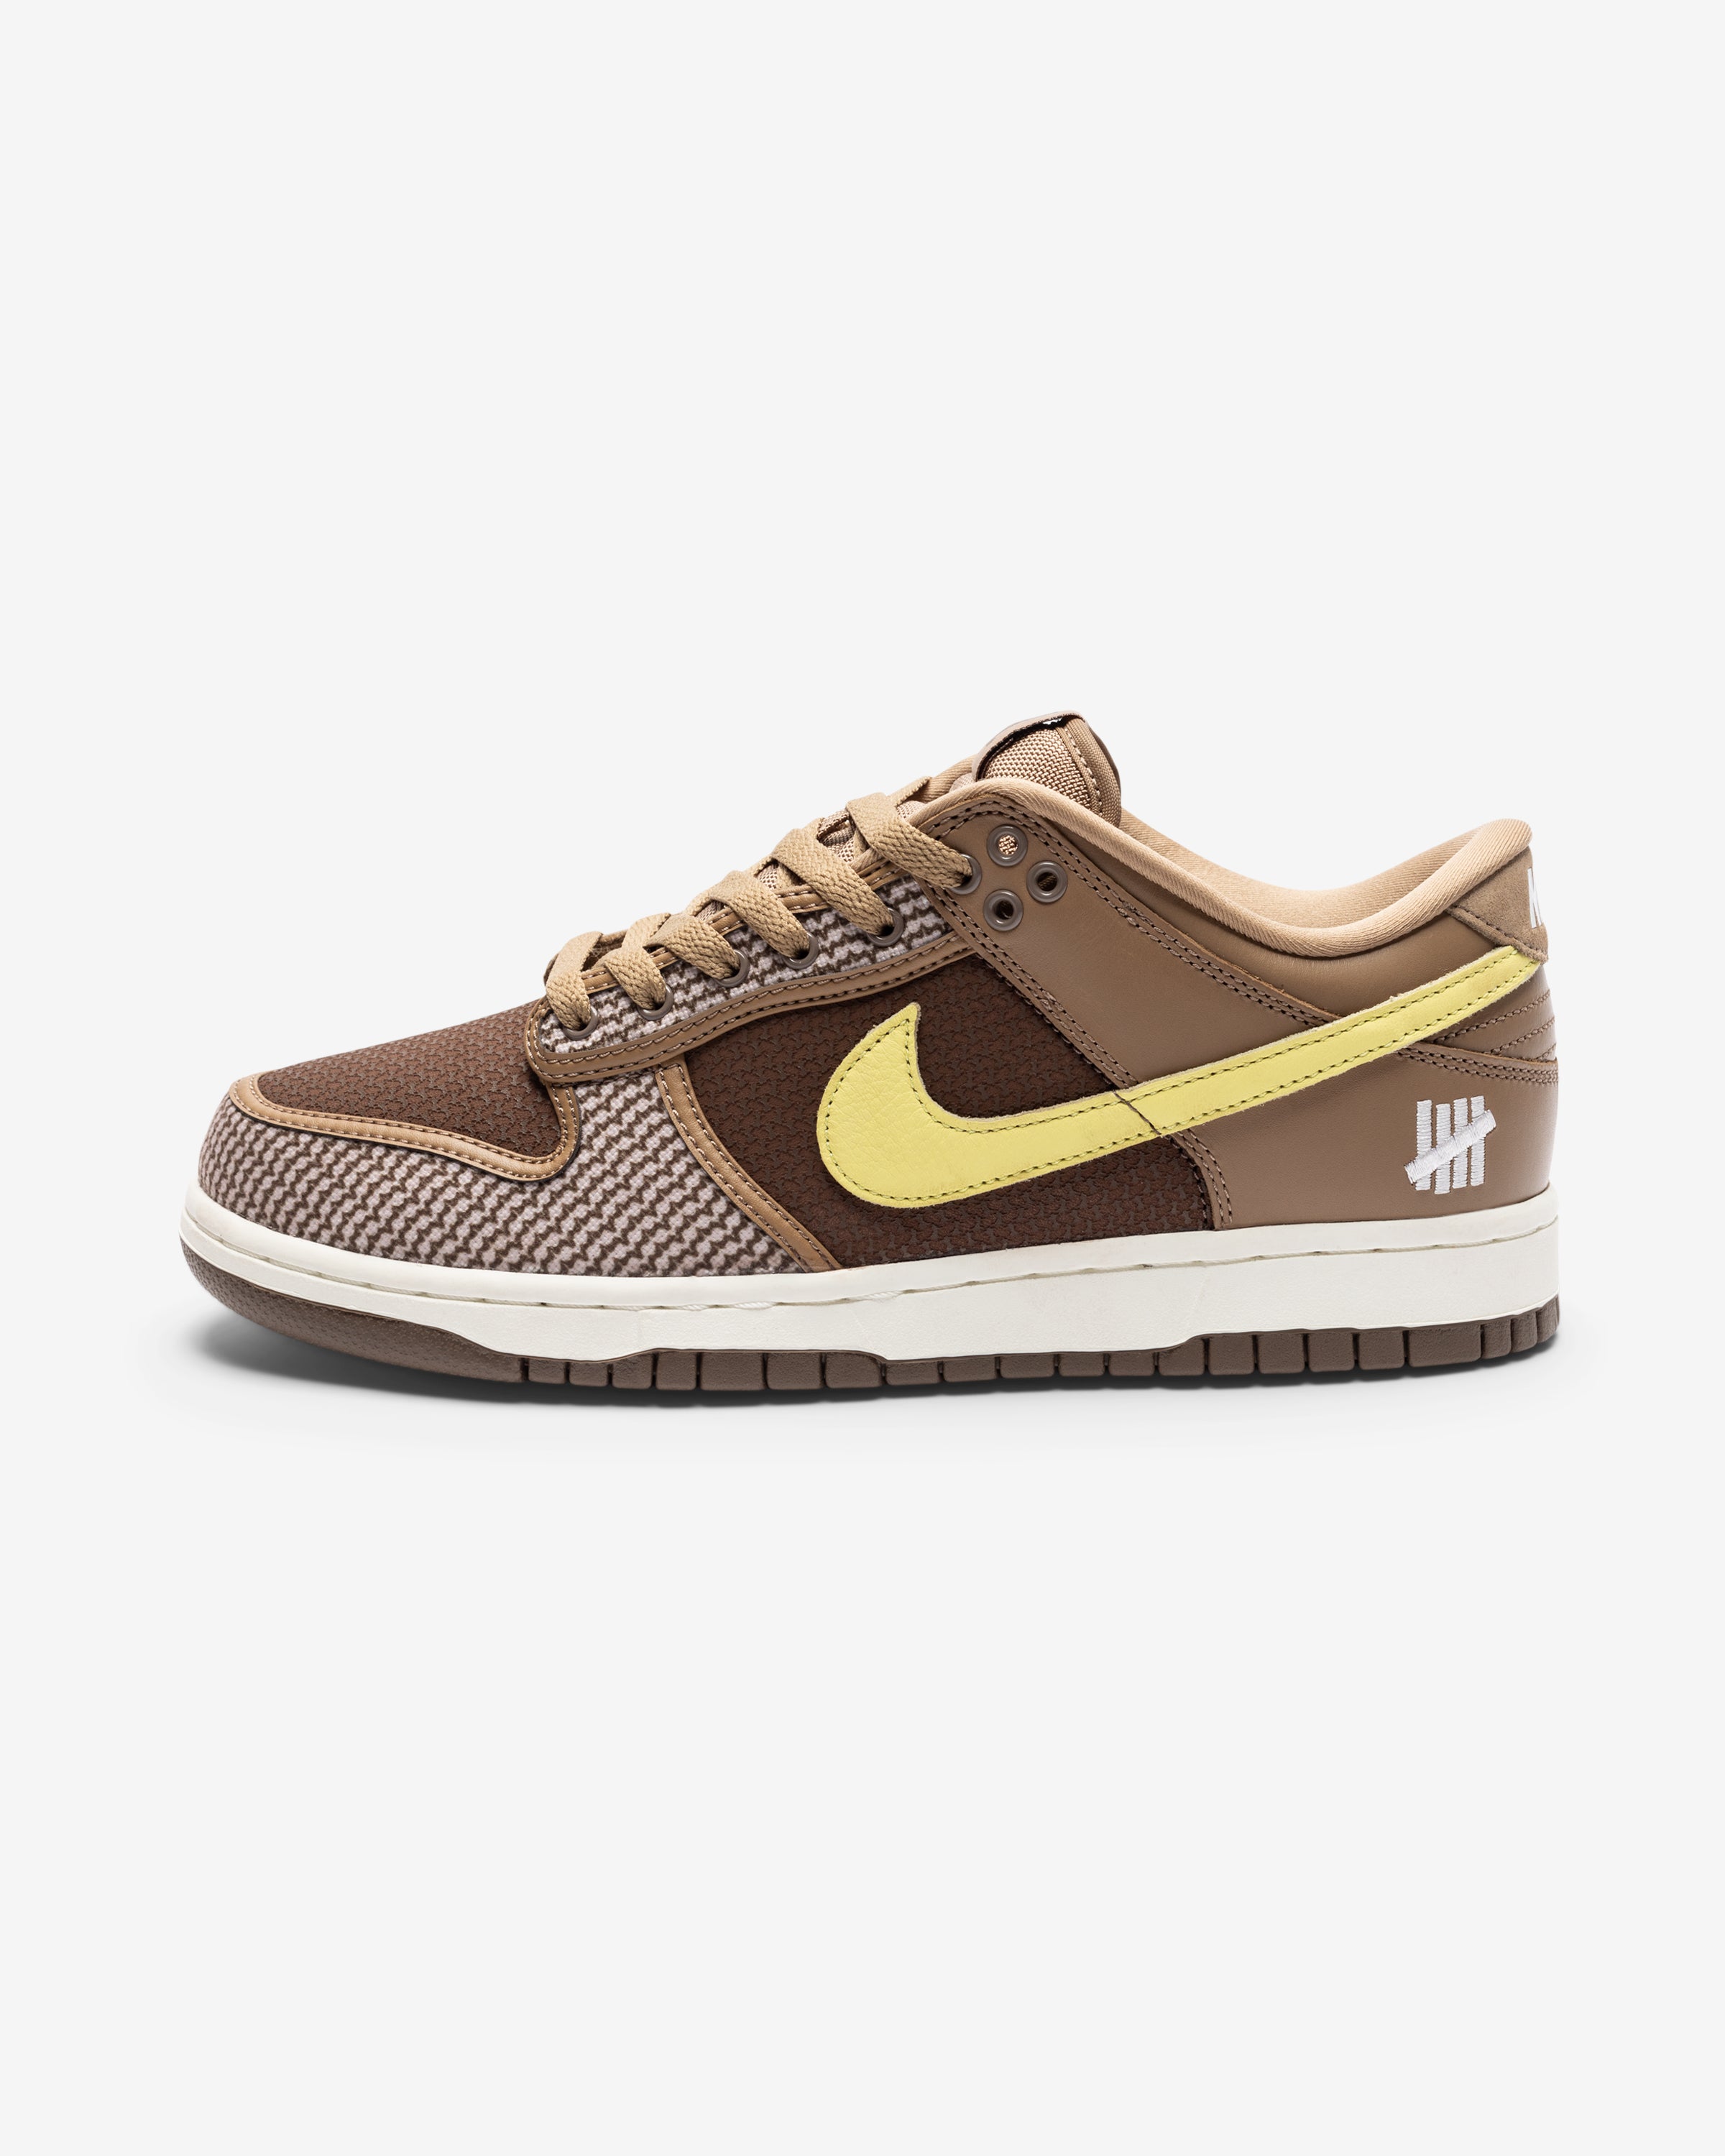 NIKE X UNDEFEATED DUNK LOW SP   CANTEEN/ LEMONFROST/ PALOMINO